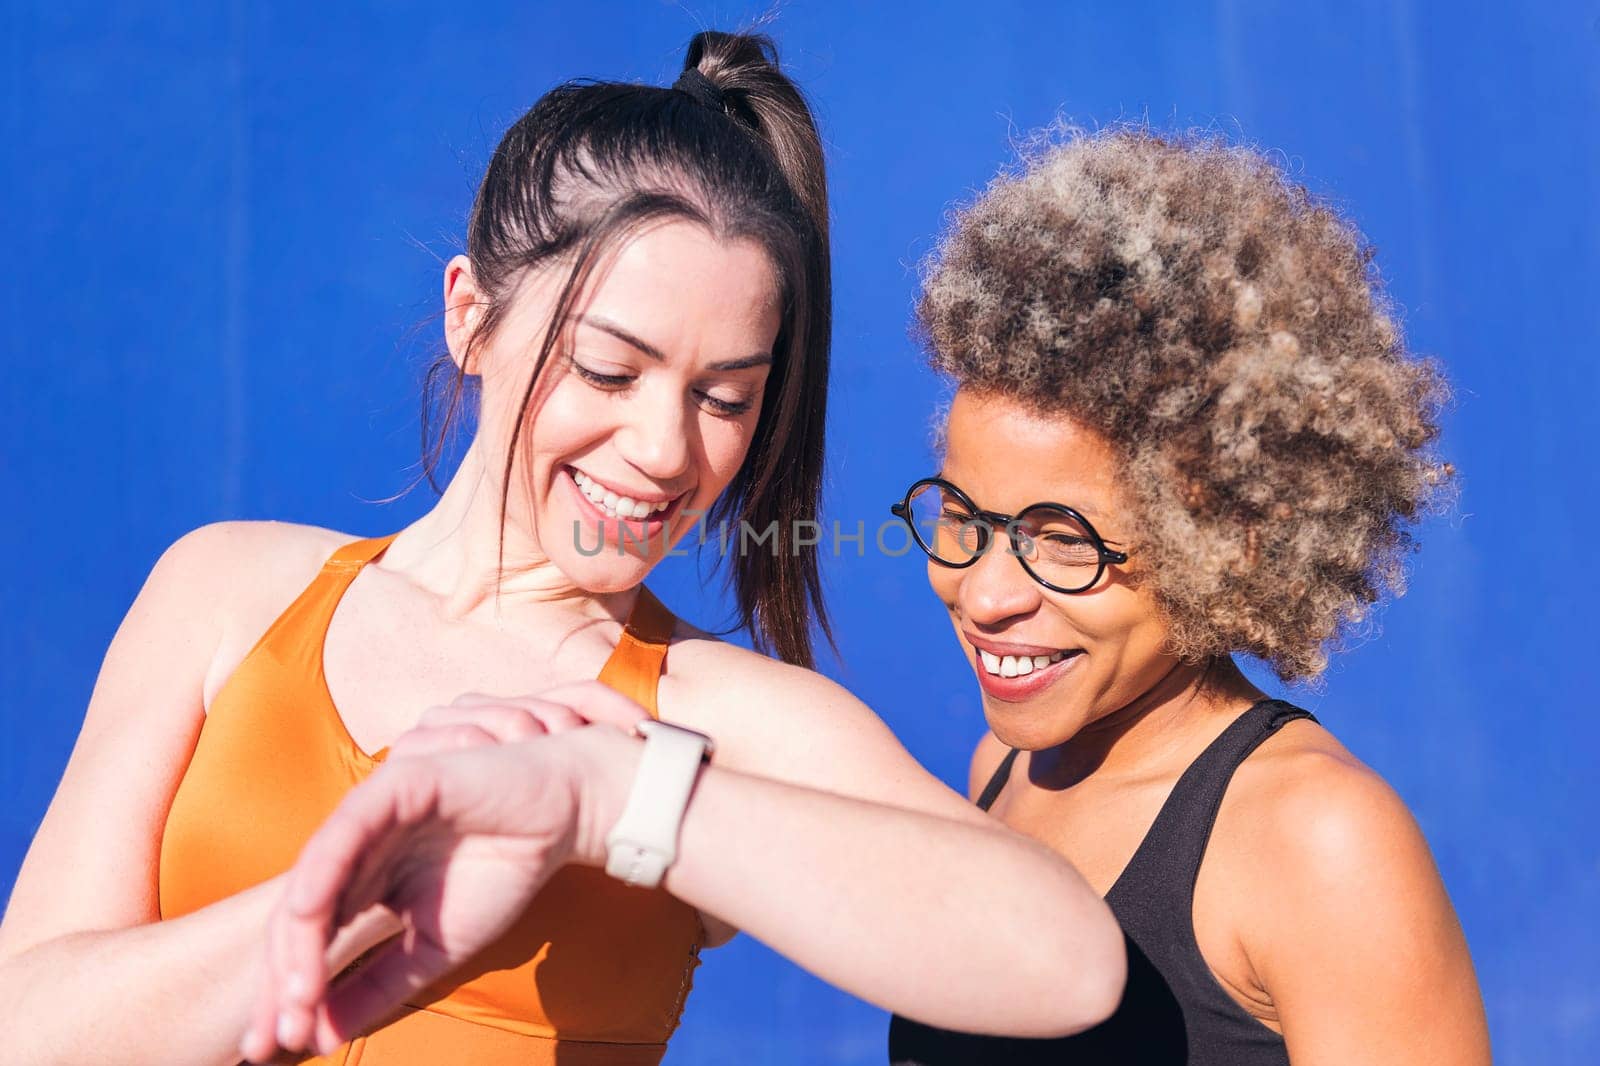 two friends using a smart watch practicing sports by raulmelldo